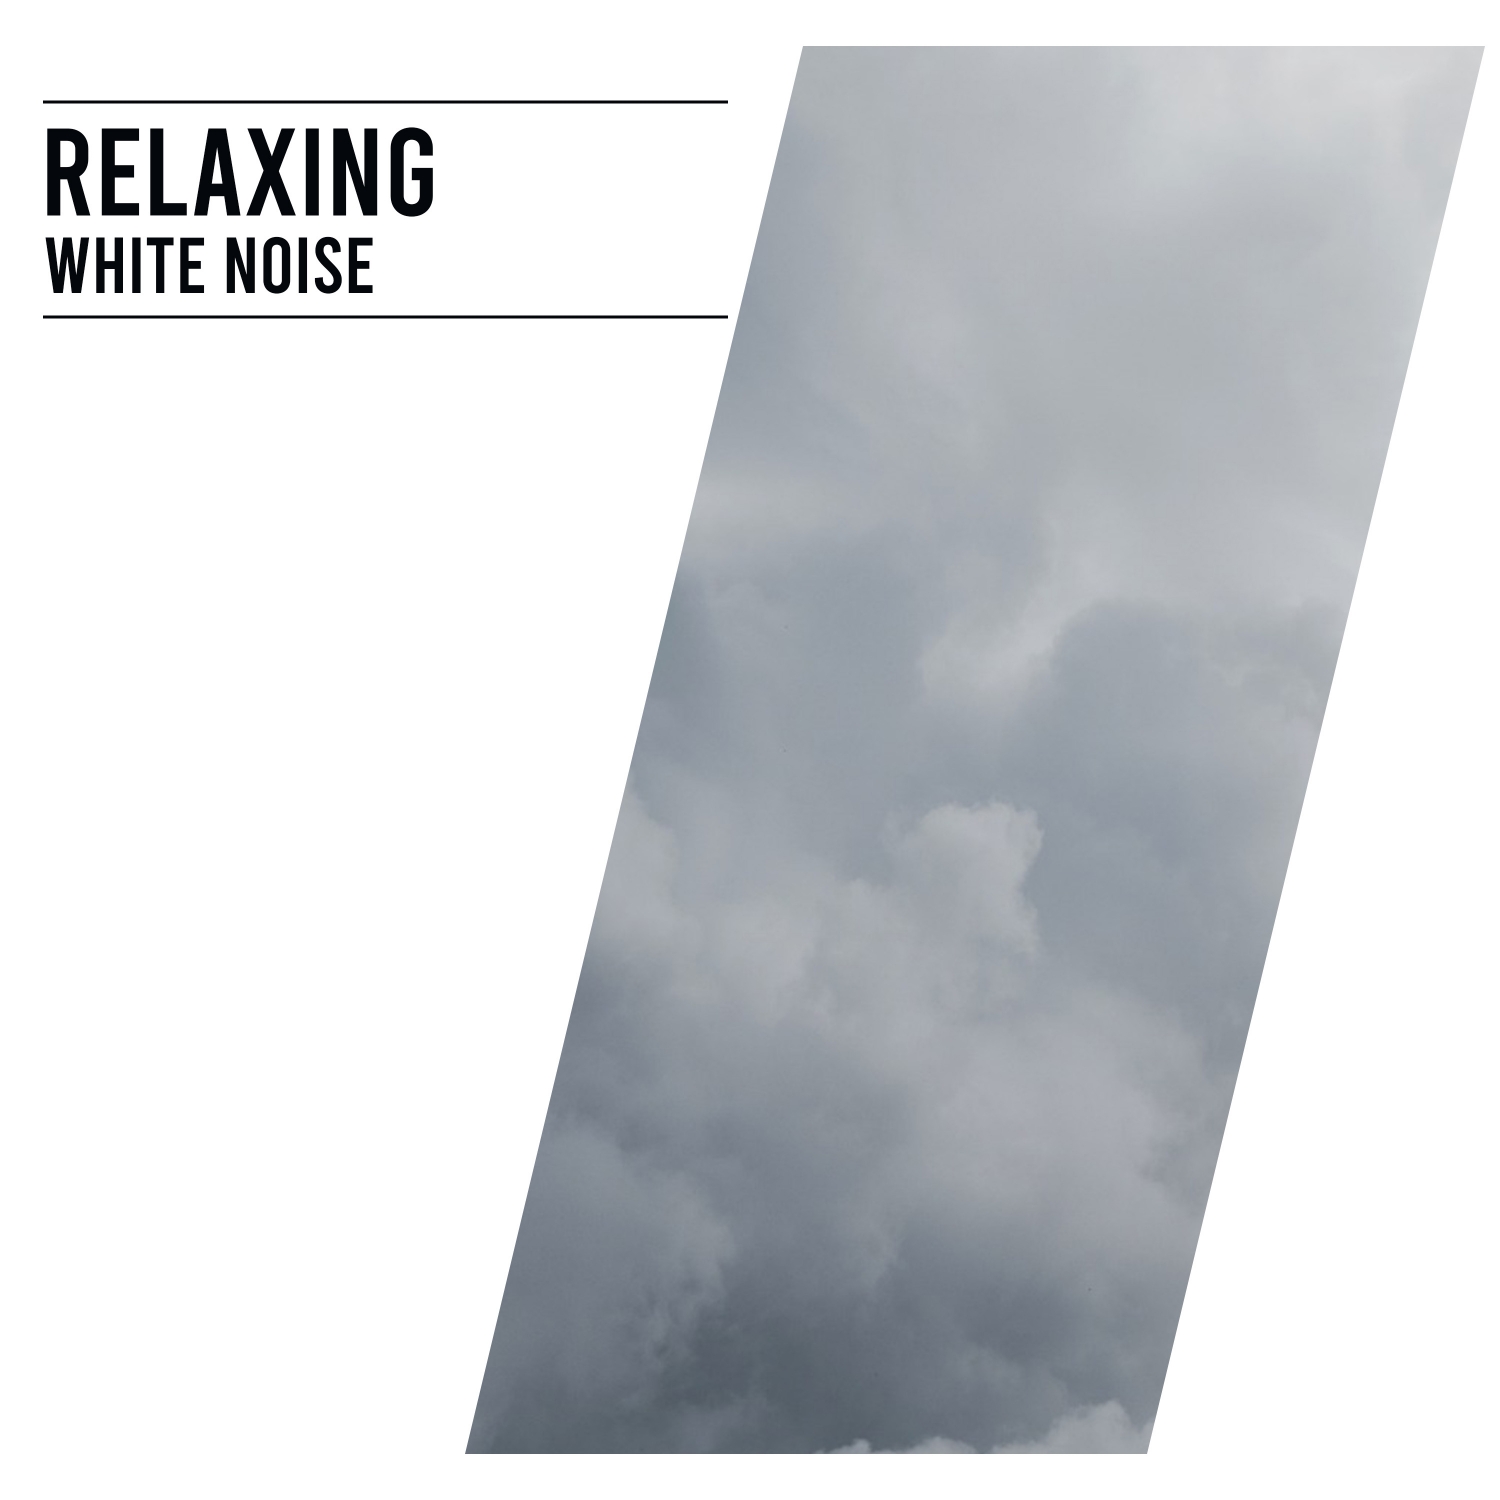 15 Relaxing White Noise Nature Sounds: A Mindfulness and Sleep Aid